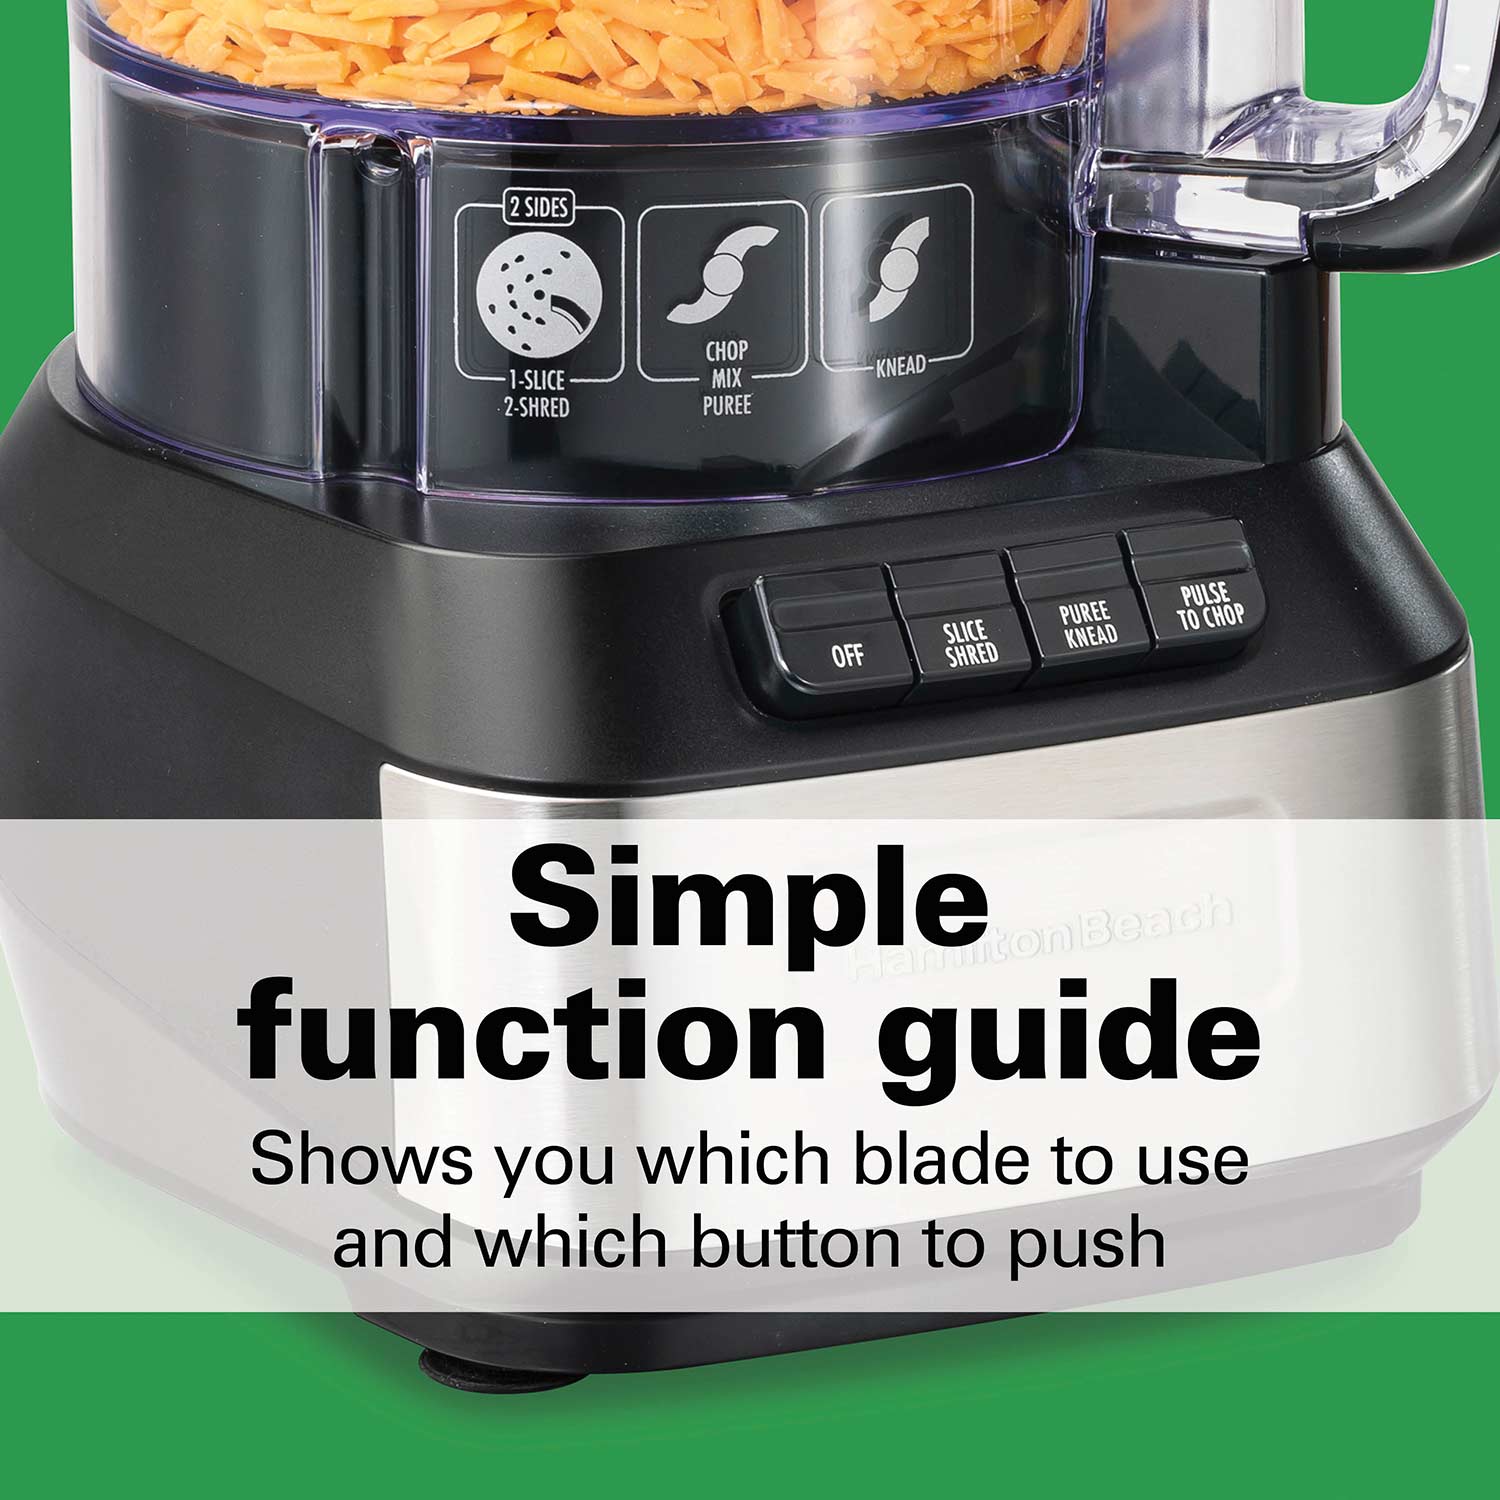 12 Cup Stack & Snap™ Food Processor, Black and Stainless - 70728